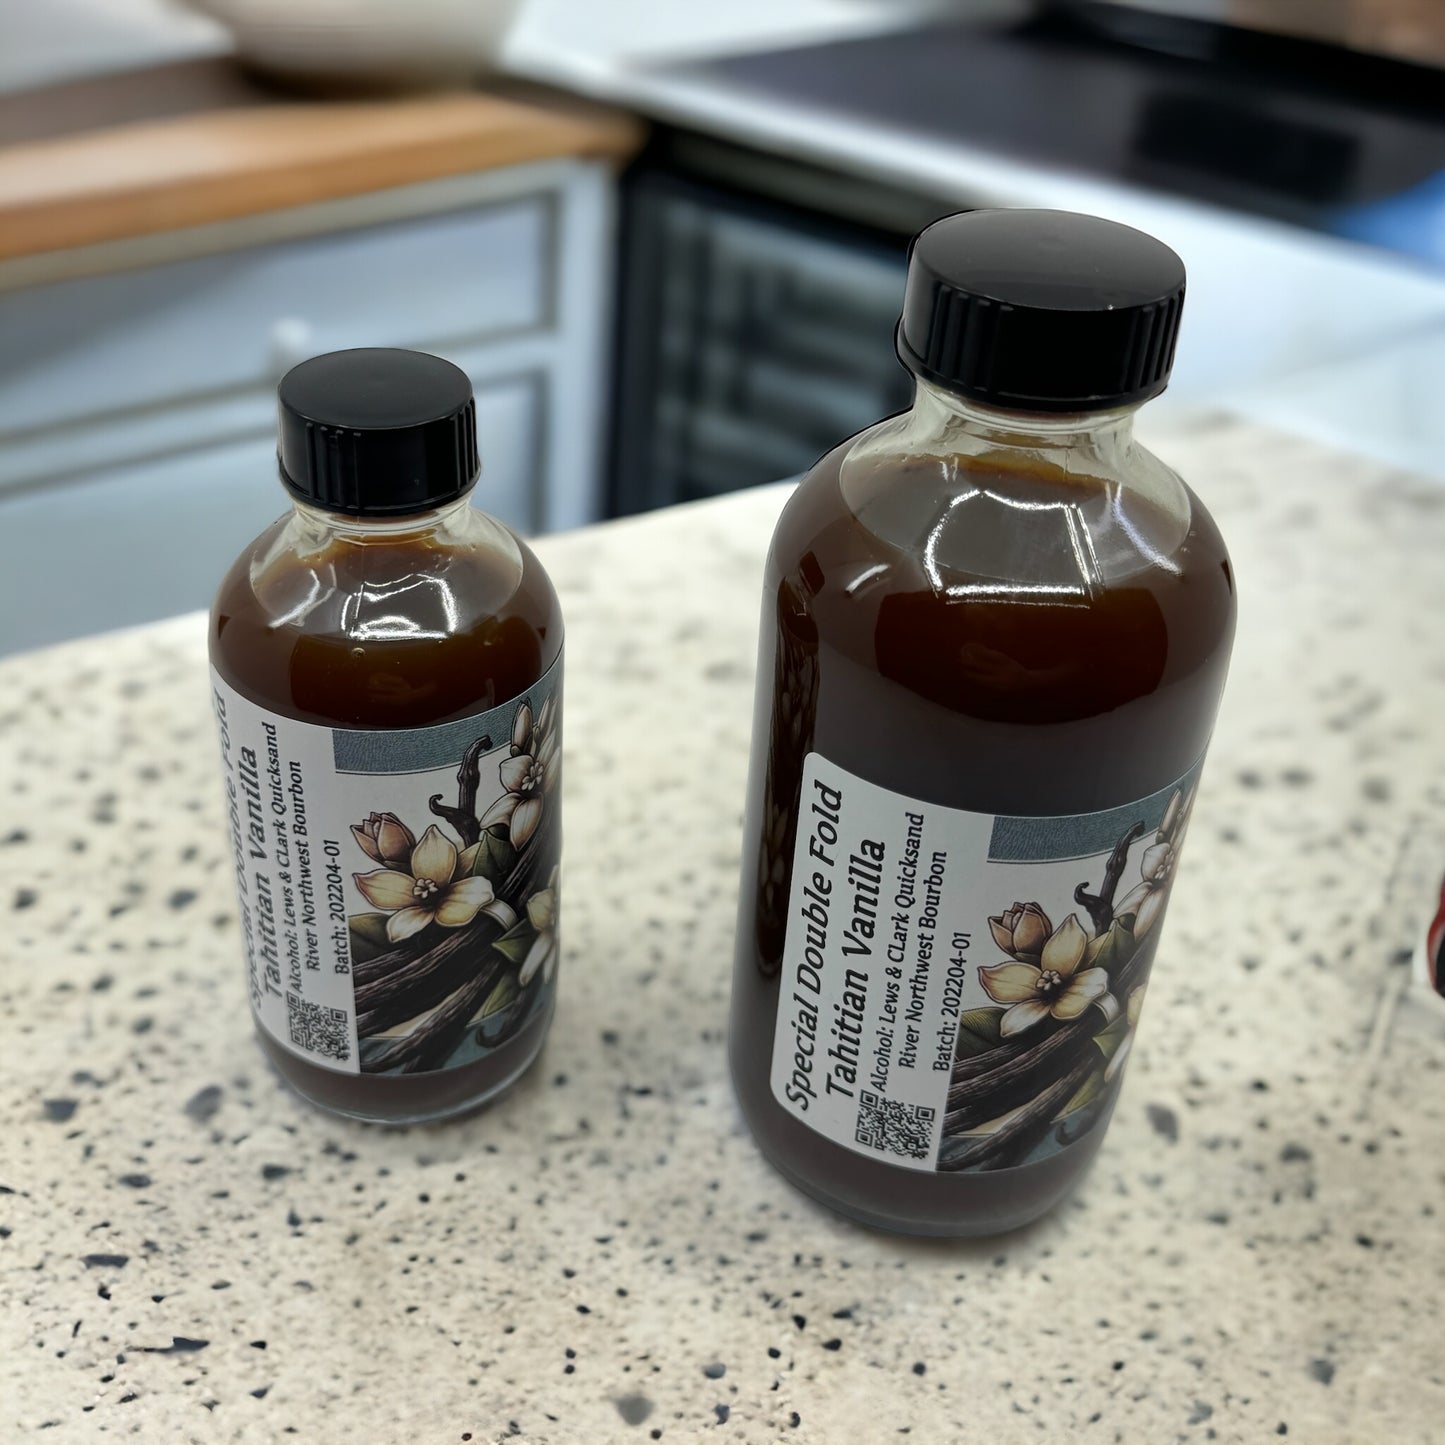 Special Edition Organic Double Tahitian Vanilla Extract (2X; Aged 21 months)